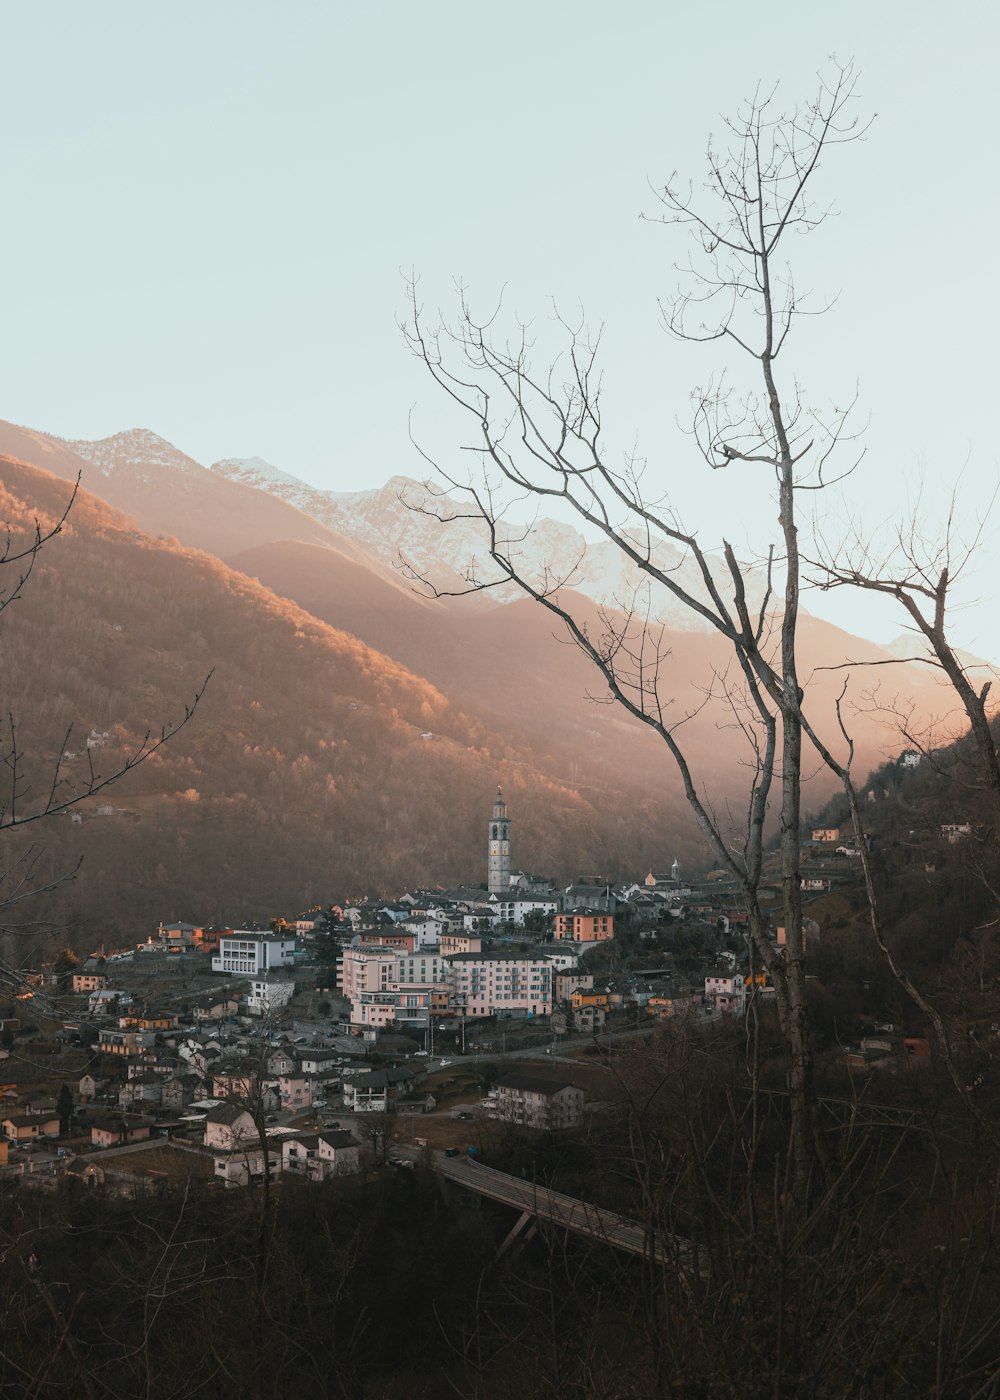 a view of a town with mountains in the background